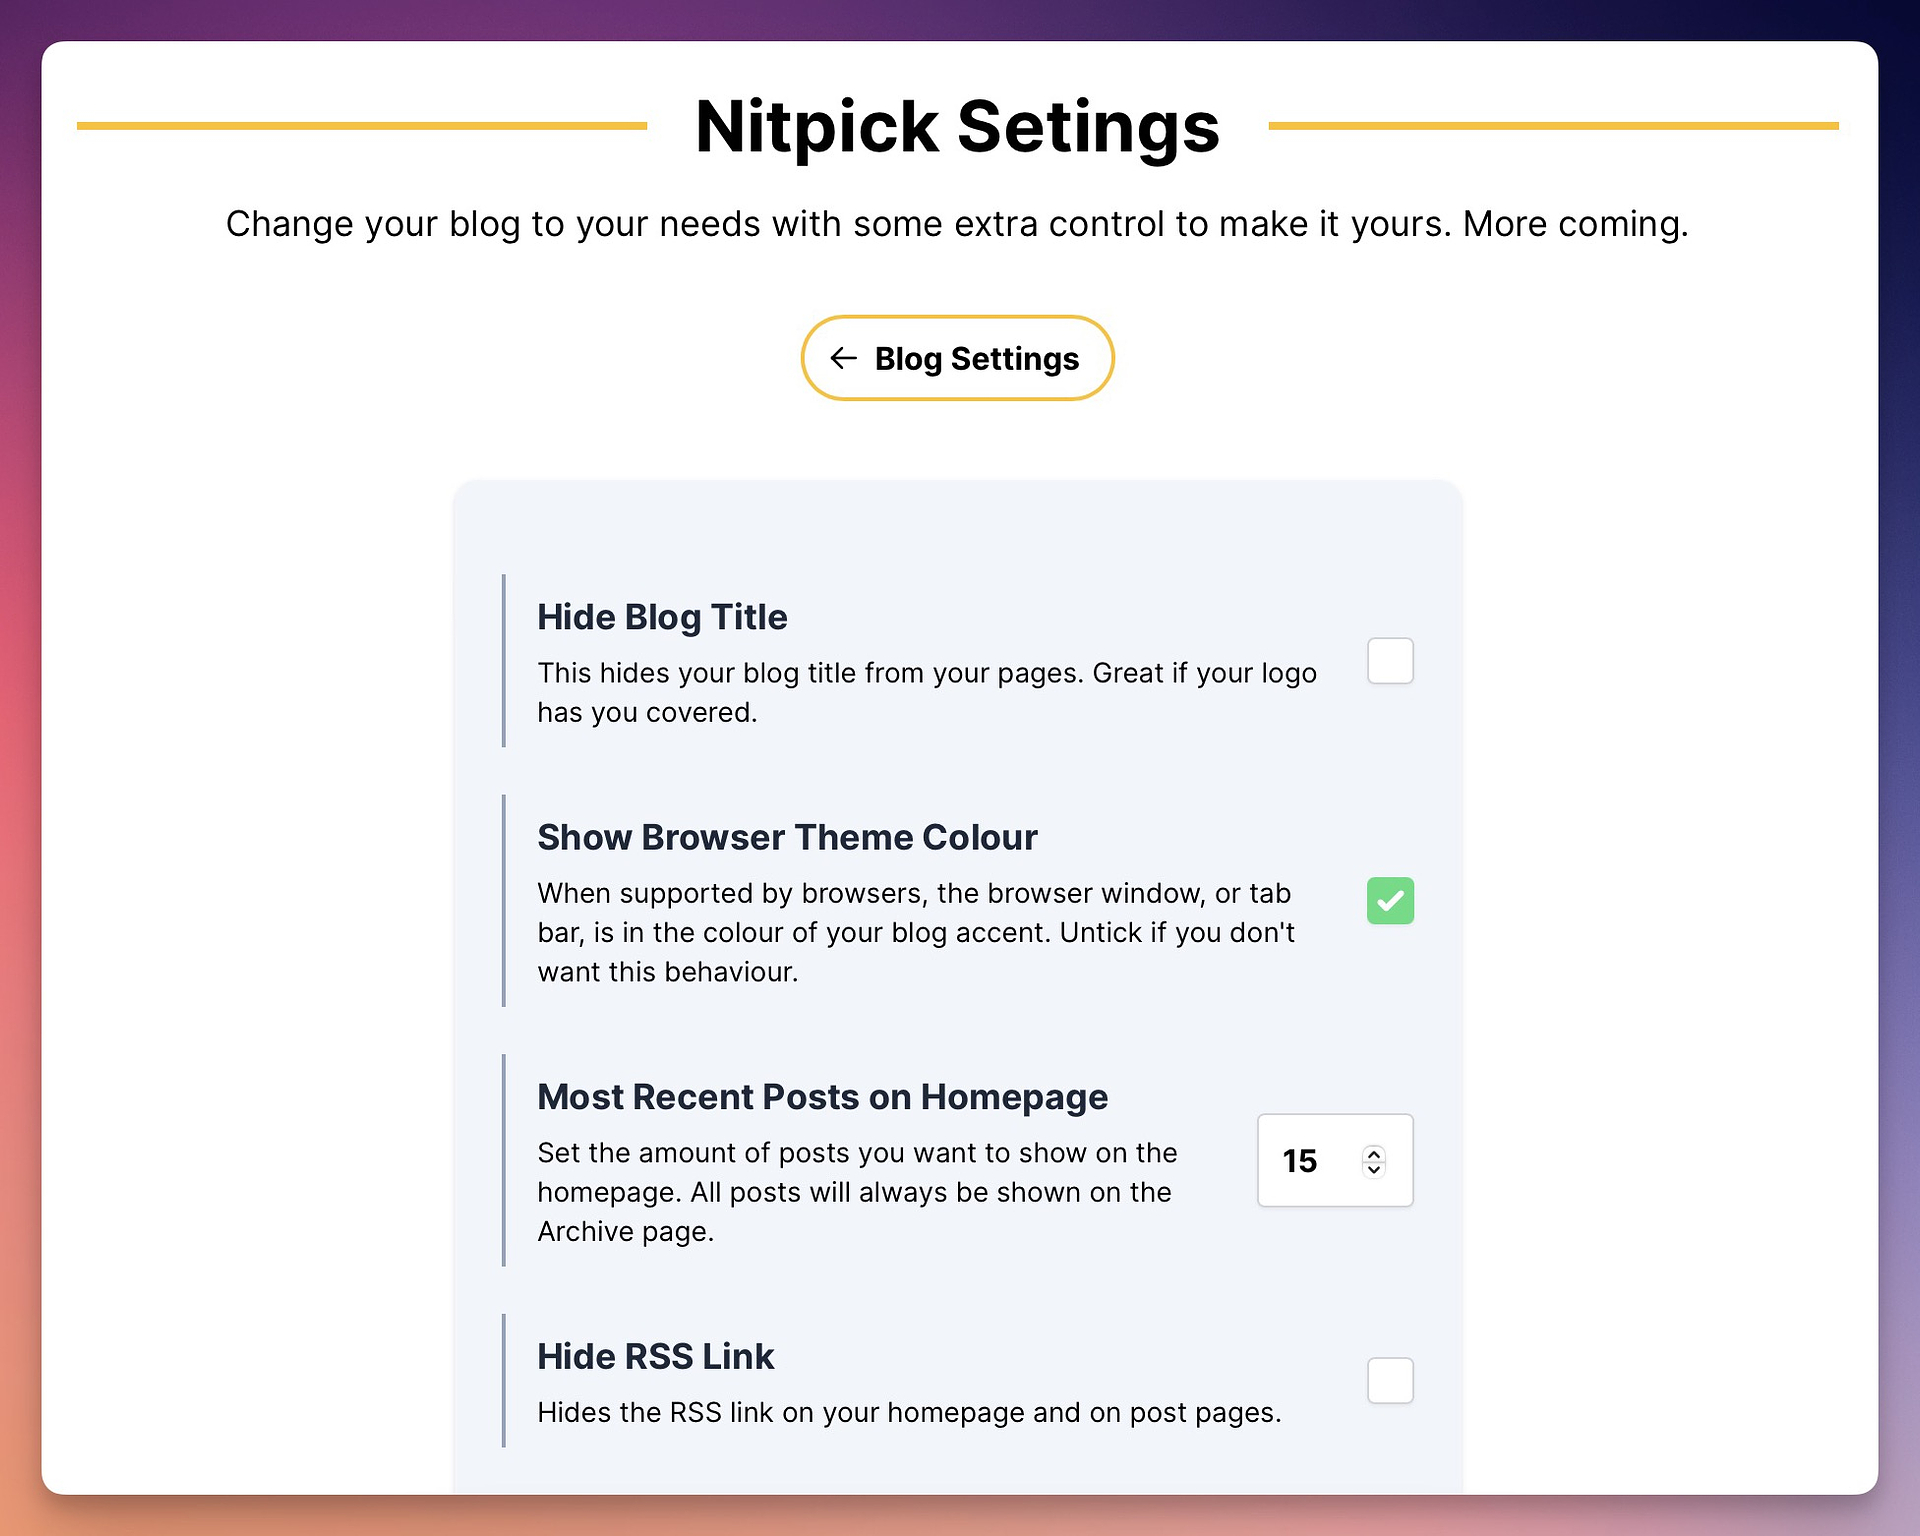 Nitpick settings for your blog, including the ability to hide the blog title, disable your theme colour from showing in browser windows plus more like the amount of recent posts to show and if you want to hide the RSS link.